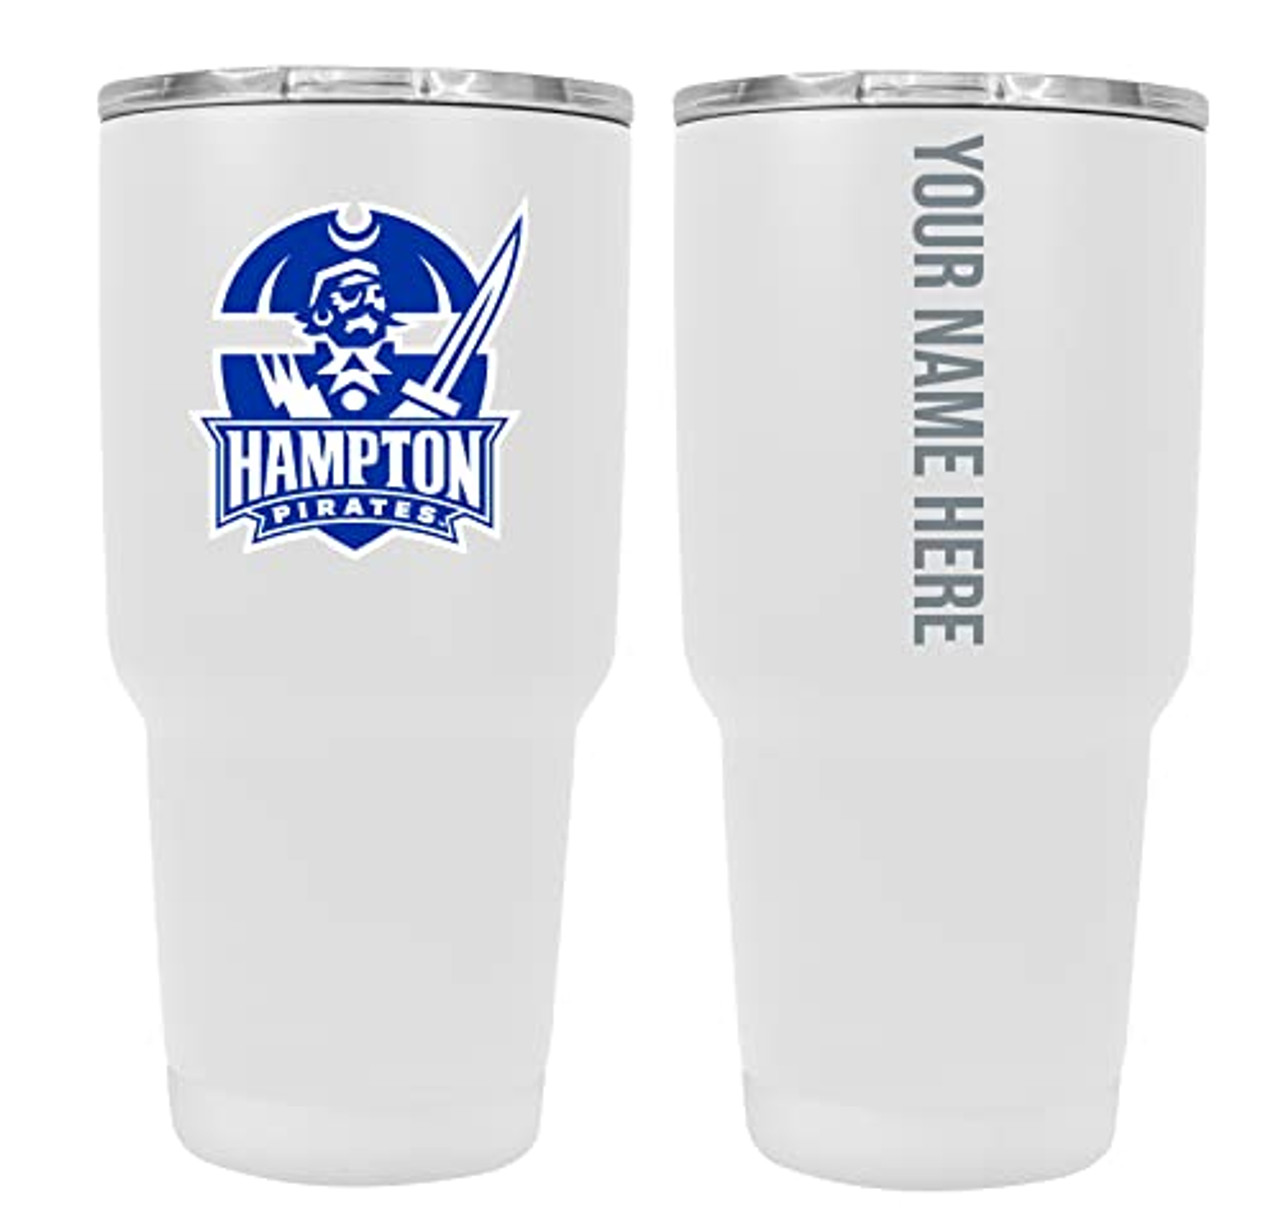 Collegiate Custom Personalized Hampton University, 24 oz Insulated Stainless Steel Tumbler with Engraved Name (White)